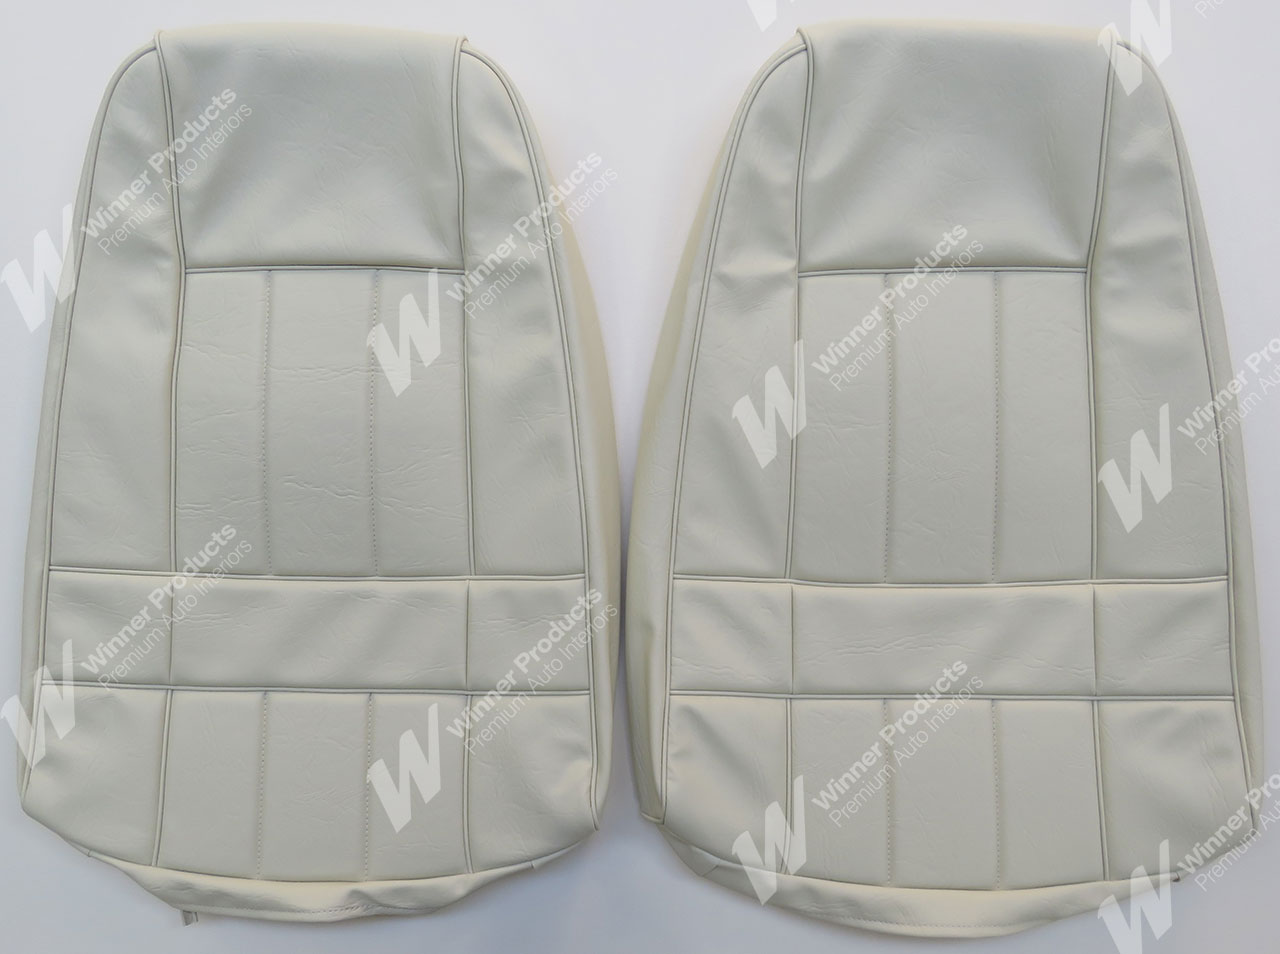 Ford GT XA GT Coupe W White Seat Covers (Image 2 of 7)